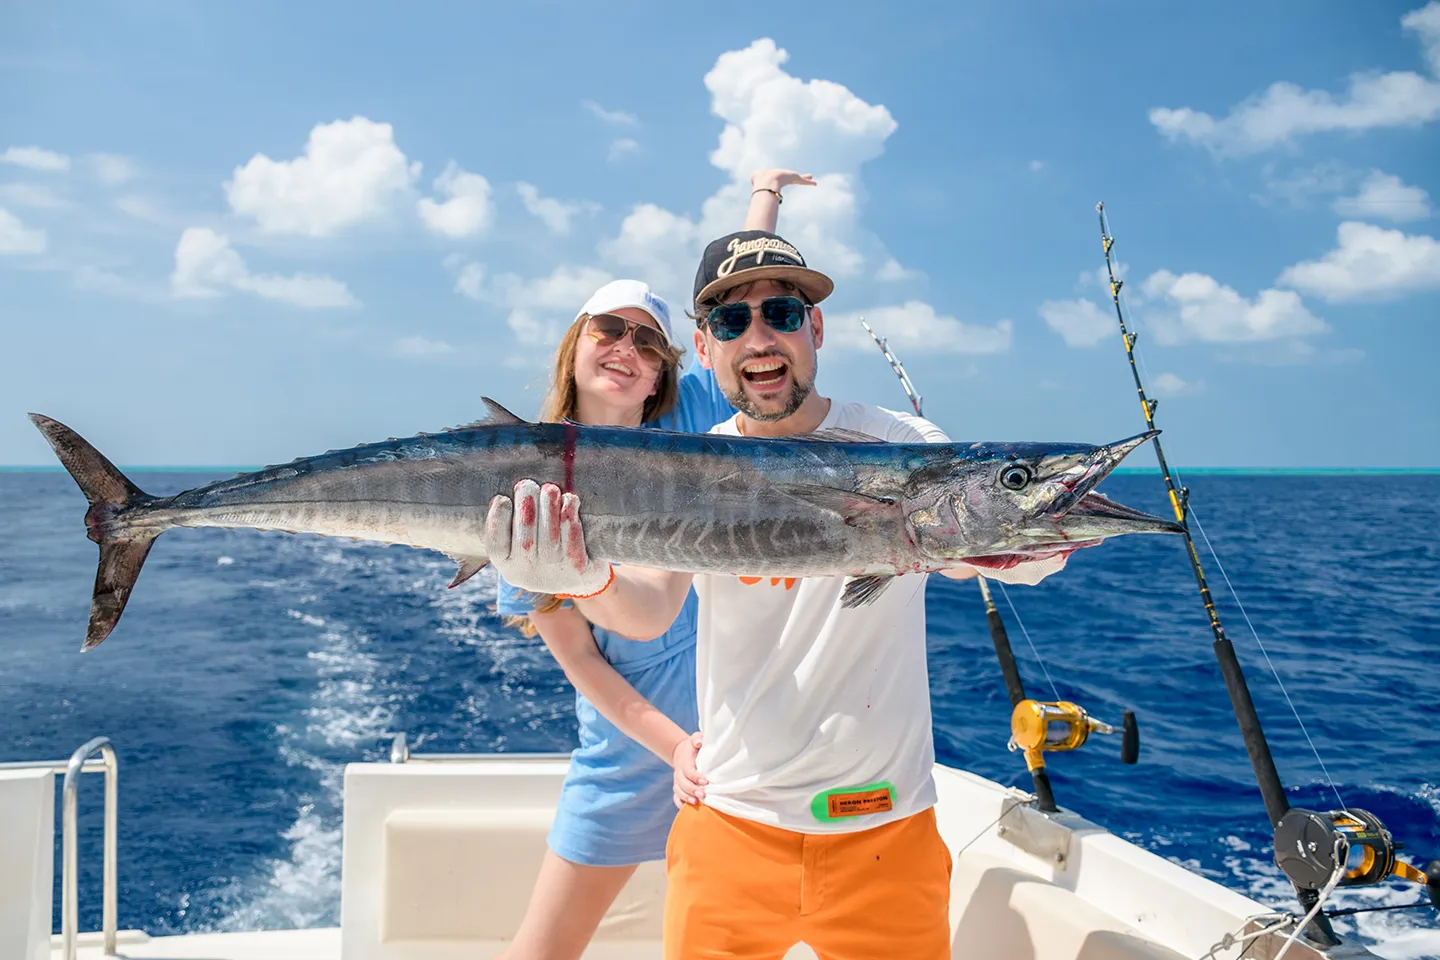 Happy couple with a big catch on a fishing trip in the Maldives